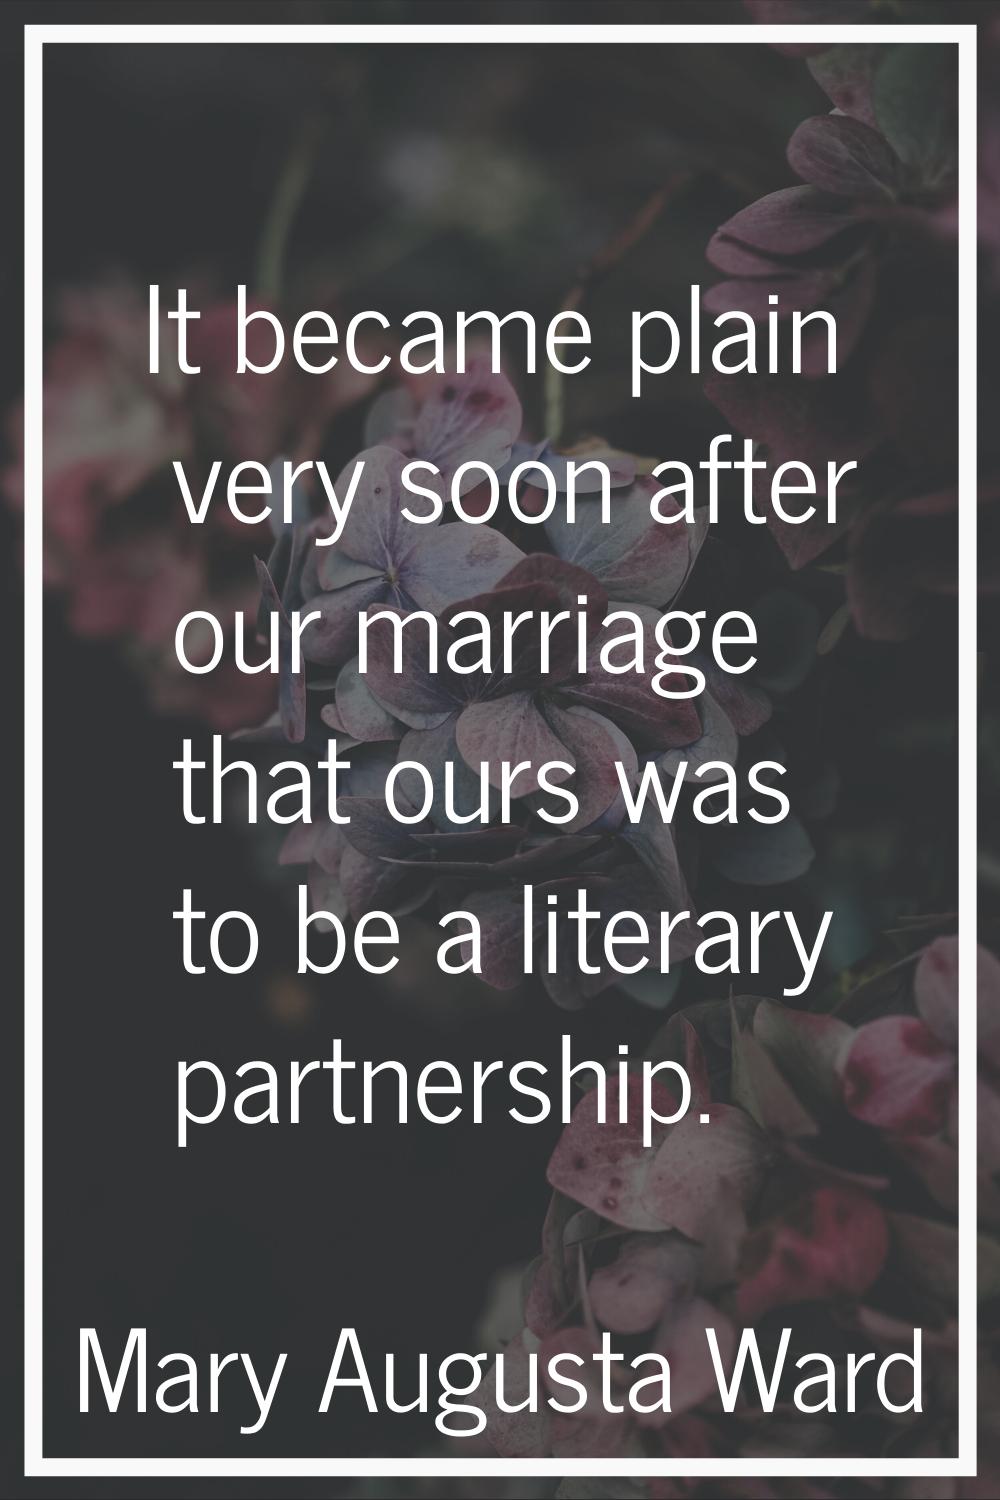 It became plain very soon after our marriage that ours was to be a literary partnership.